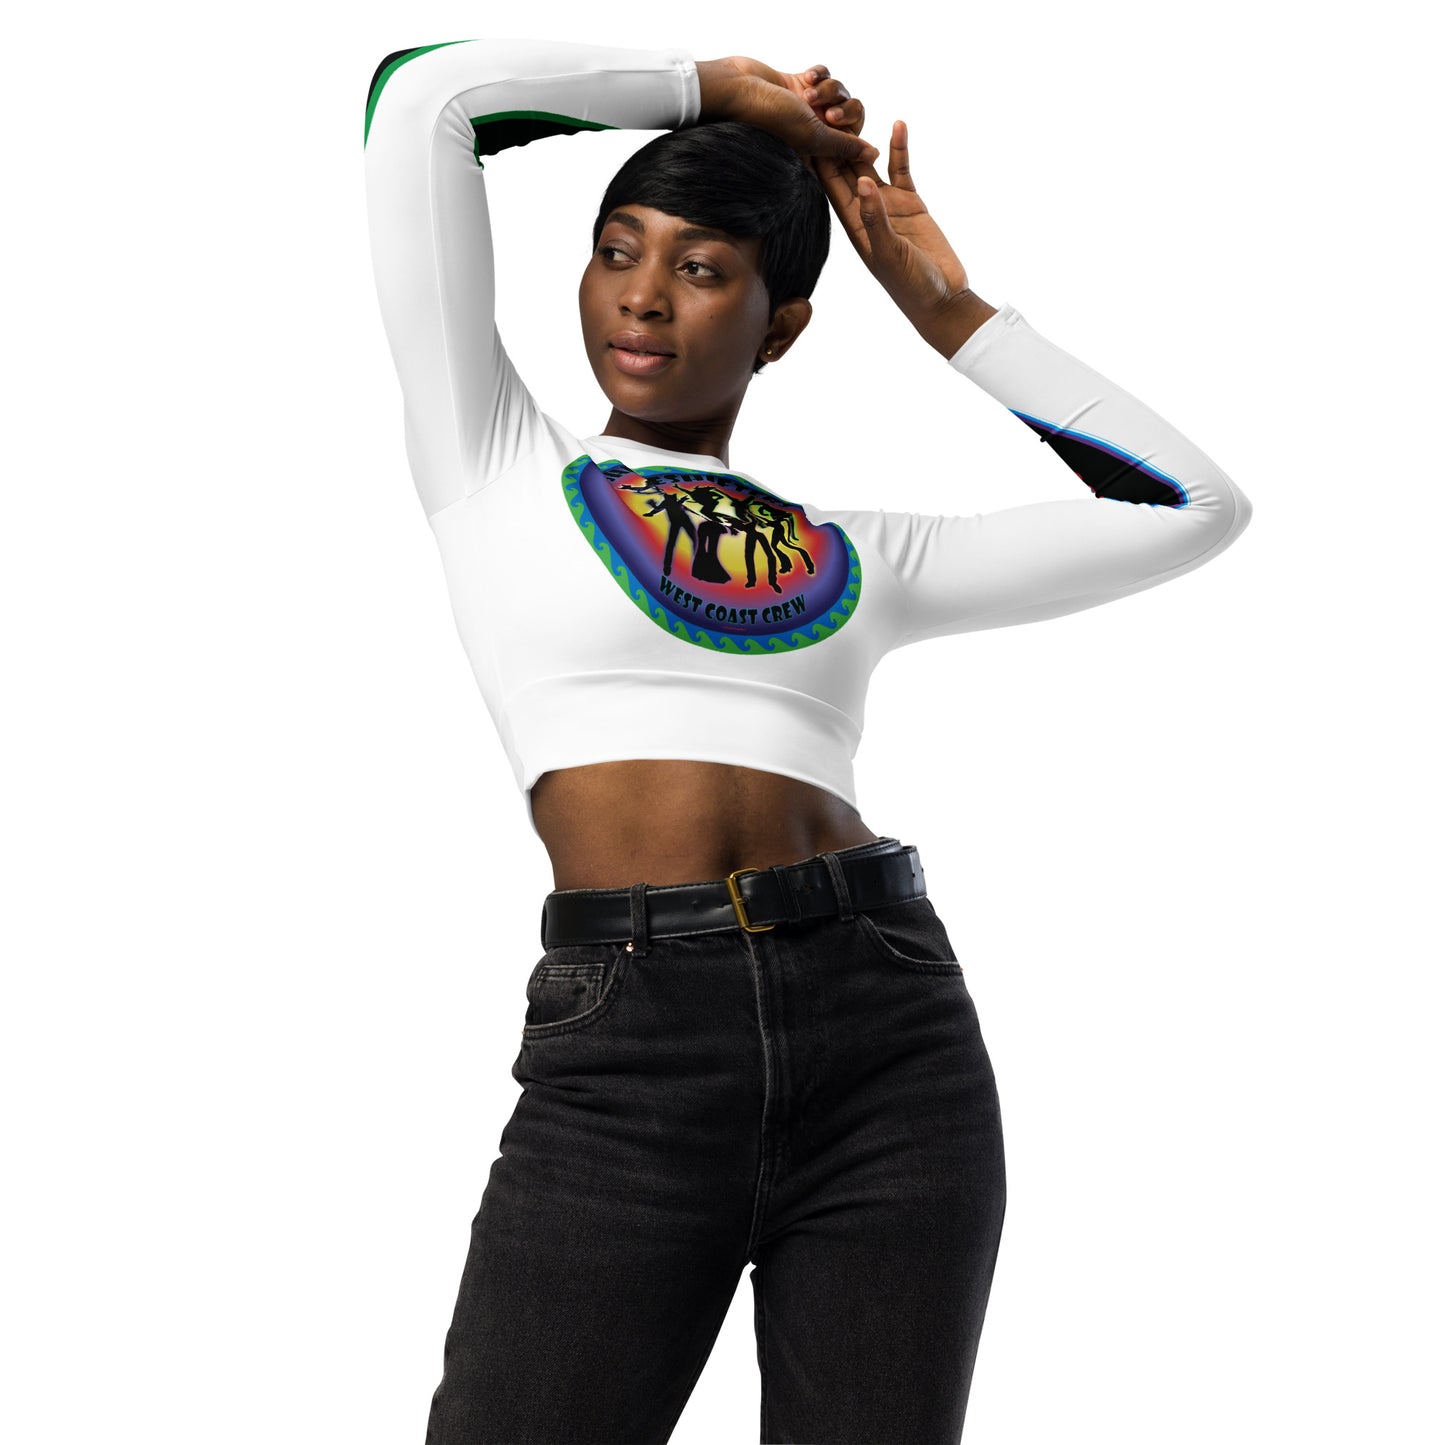 Shapeshifter West Coast Crew recycled long-sleeve crop top